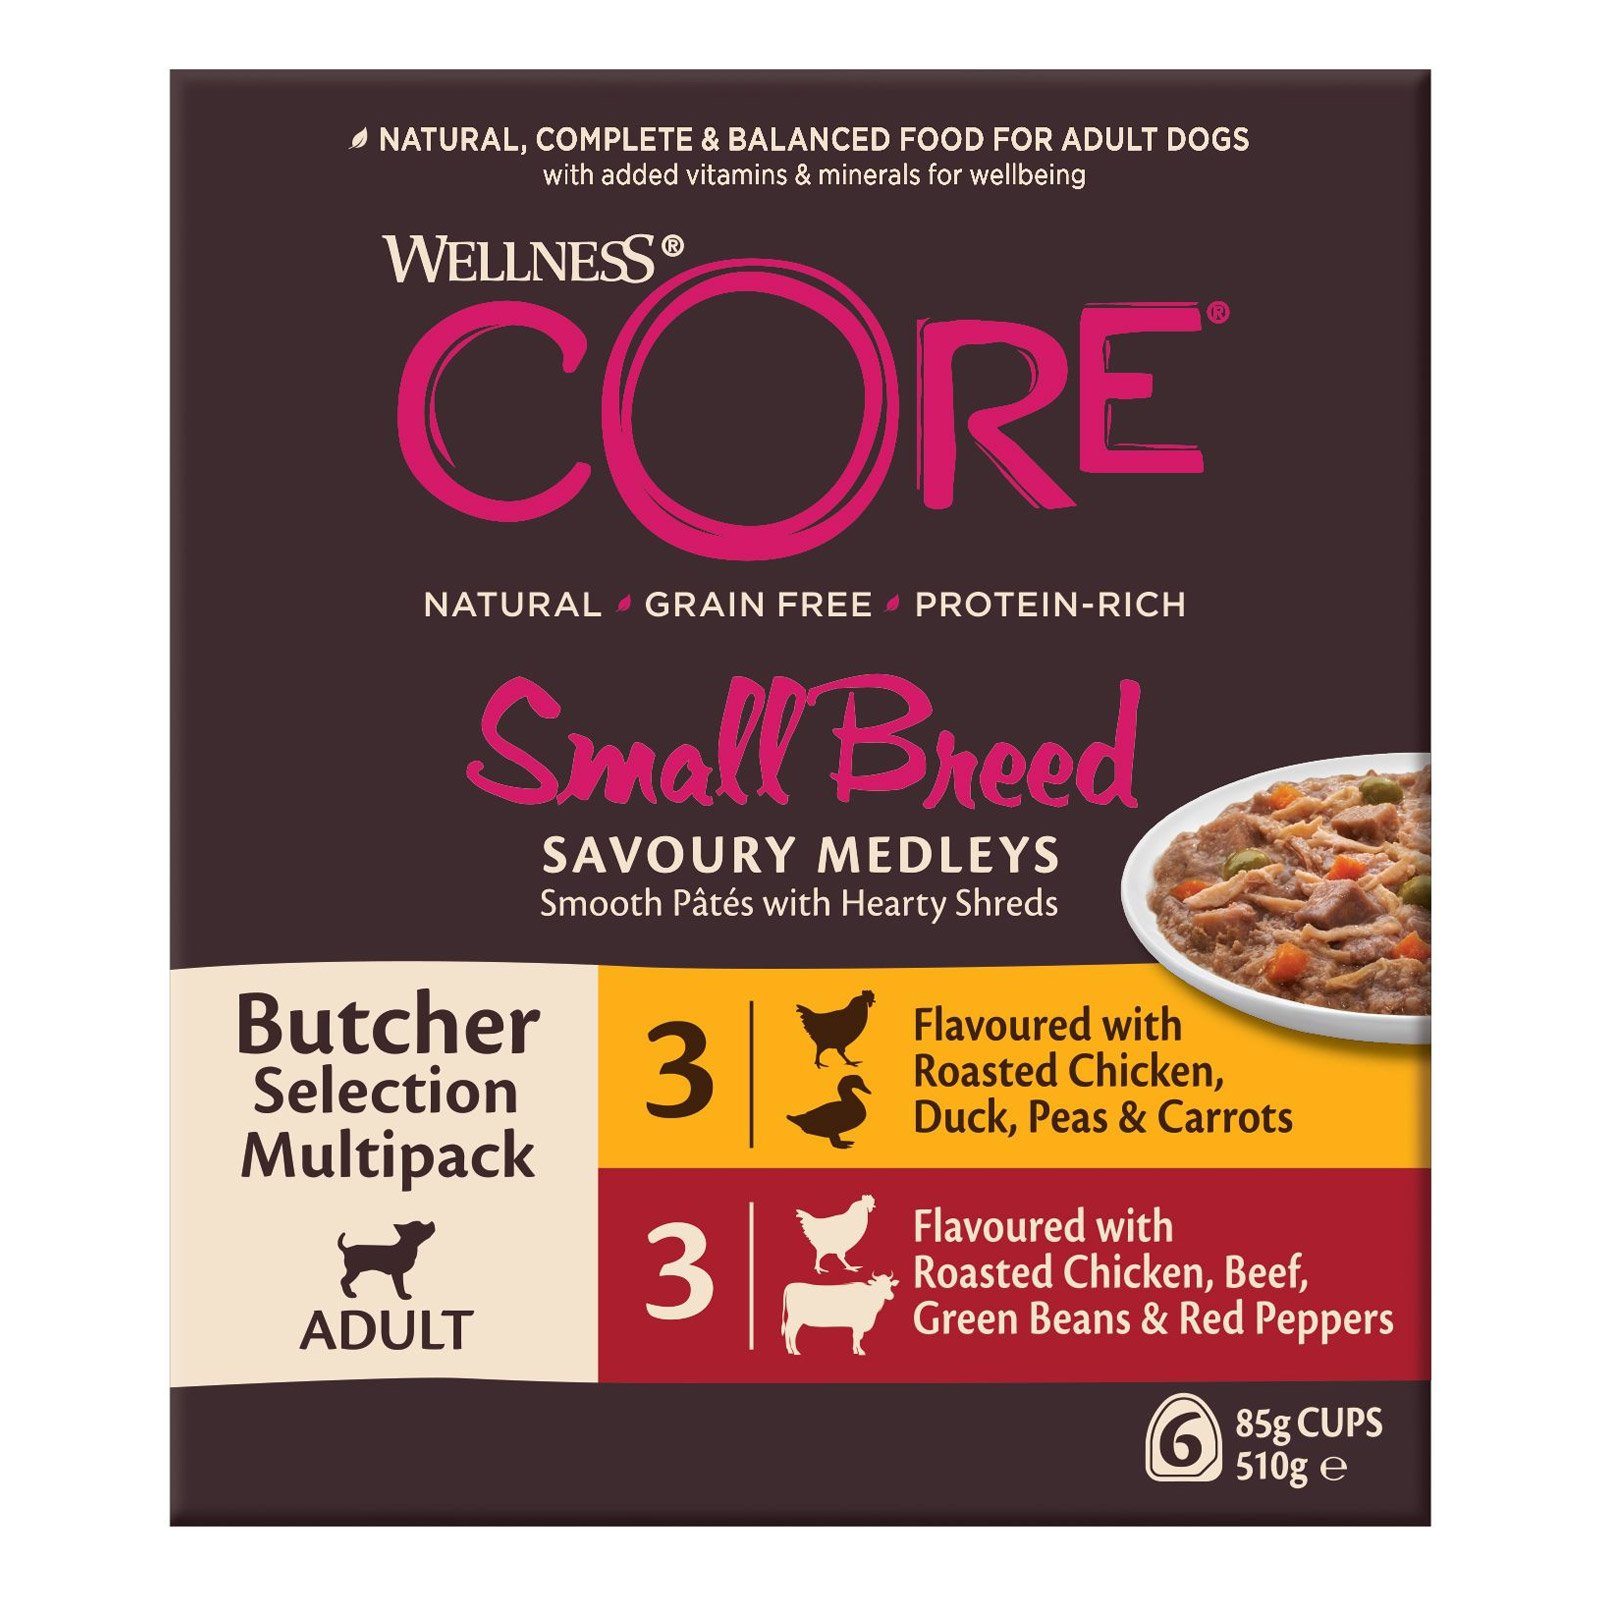 Wellness CORE Savoury Medleys Butchers Selection Multipack